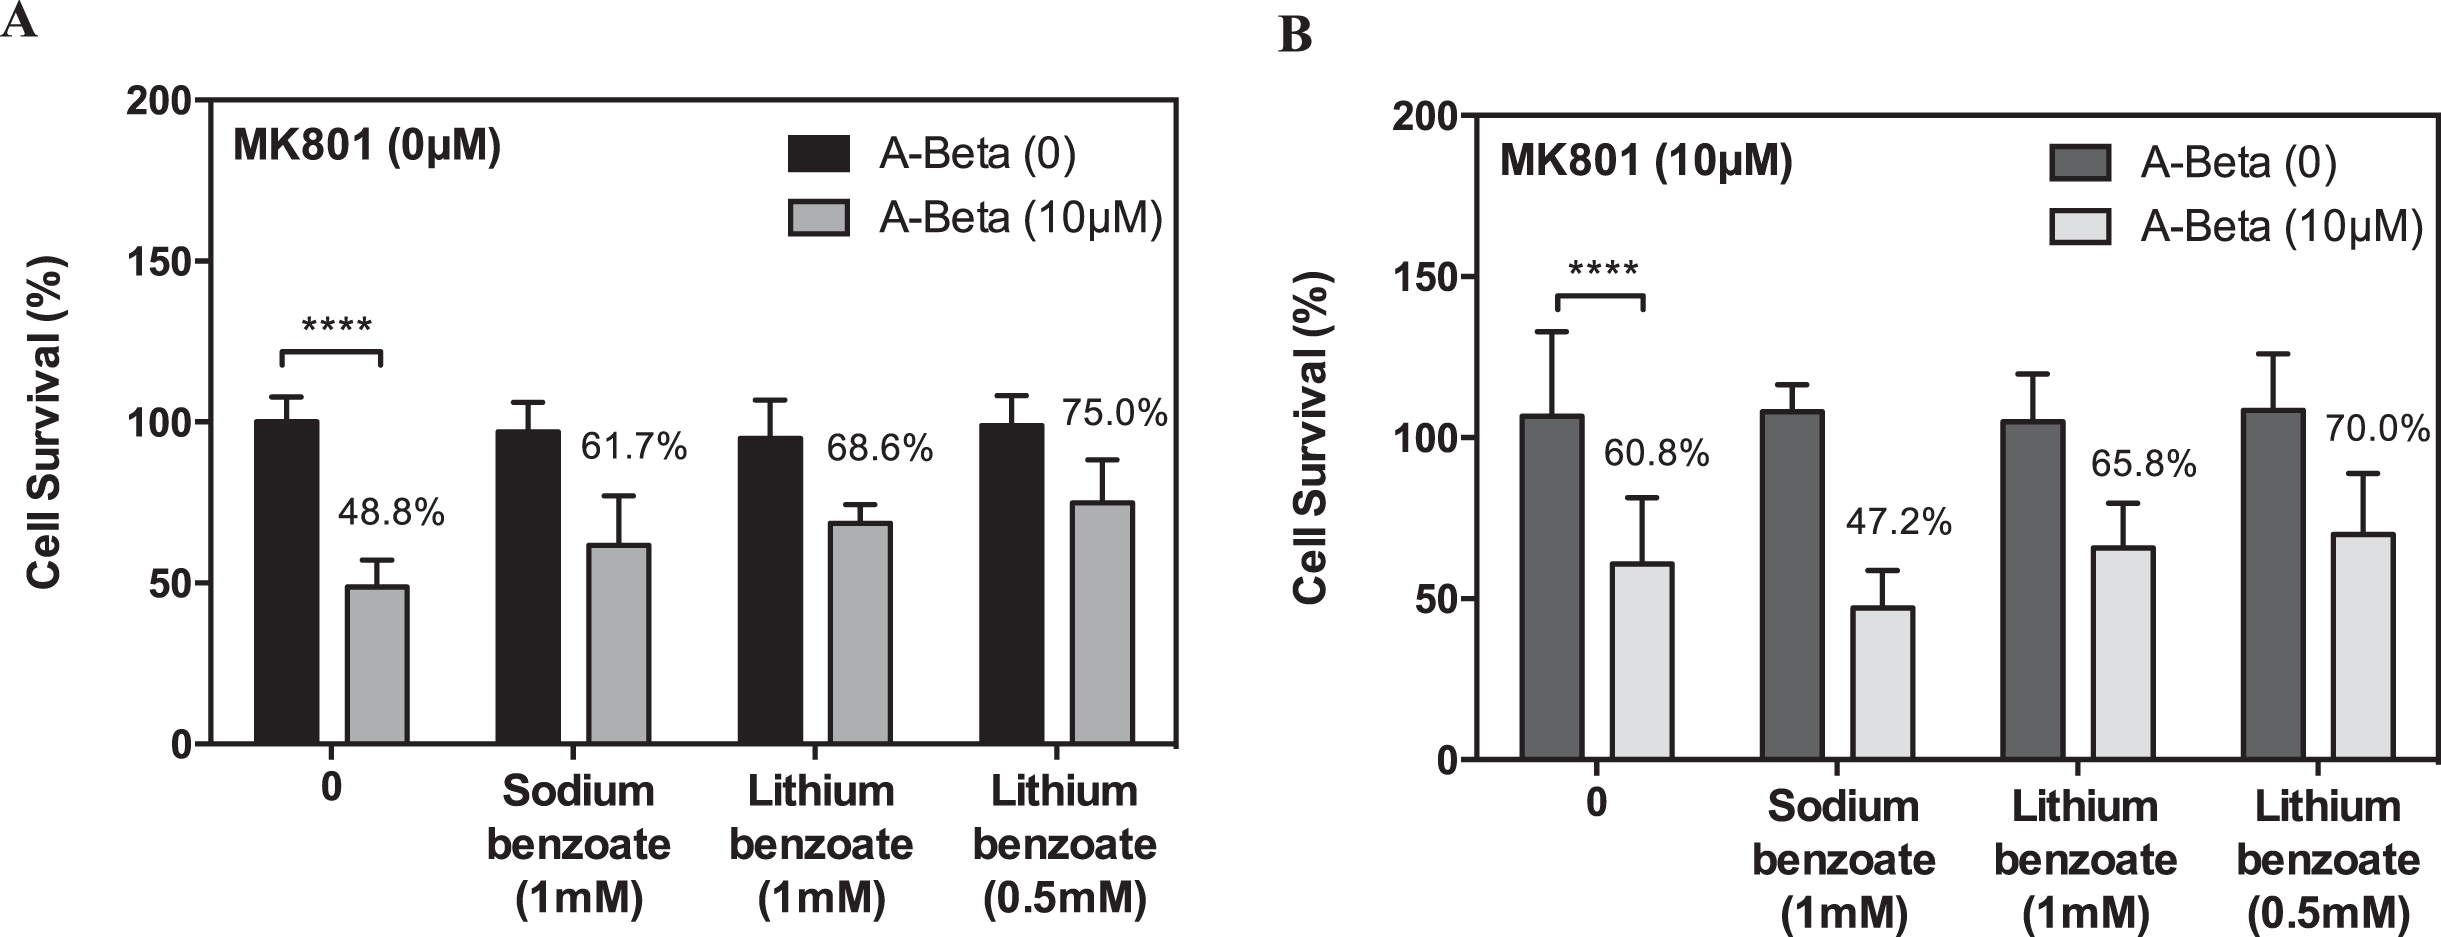 Effect of MK-801 on sodium benzoate and lithium benzoate-elicited protection against Aβ25–35-induced neurotoxicity. Rat cortical neurons were pre-treated with 10μM Aβ25-35 (Amyloid-β peptide 25-35) for 2 days, and then followed by treatment of sodium benzoate (SB; 1 mM) or lithium benzoate (LiBen; 0.5 and 1 mM) for 4 days in the (A) absence or (B) presence of MK-801 (10μM). Cell viability was determined by MTT assay and expressed as percentage of the corresponding control cells. Data represent mean ± SD from N = 3 for each experiment condition and analyzed by one-way analysis of variance (ANOVA) followed by a post hoc Student-Newman-Keuls test. ****p<0.0001 as compared to the cells challenged with Aβ25-35 alone without postconditioning.